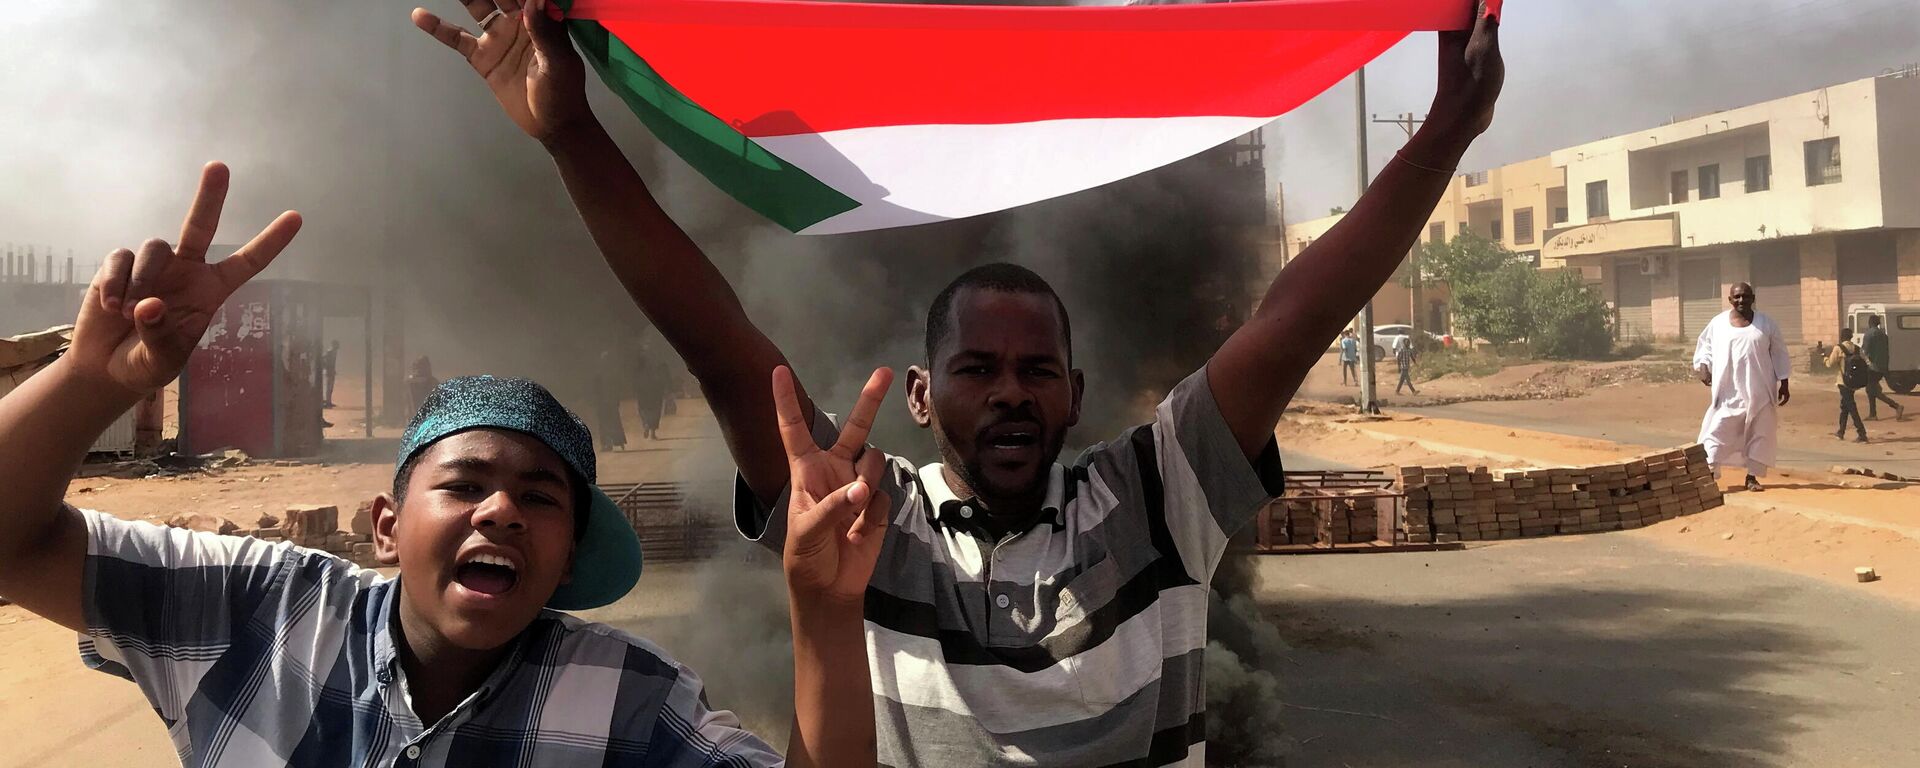 A protester waves a flag during what the information ministry calls a military coup in Khartoum, Sudan, October 25, 2021 - Sputnik International, 1920, 27.10.2021